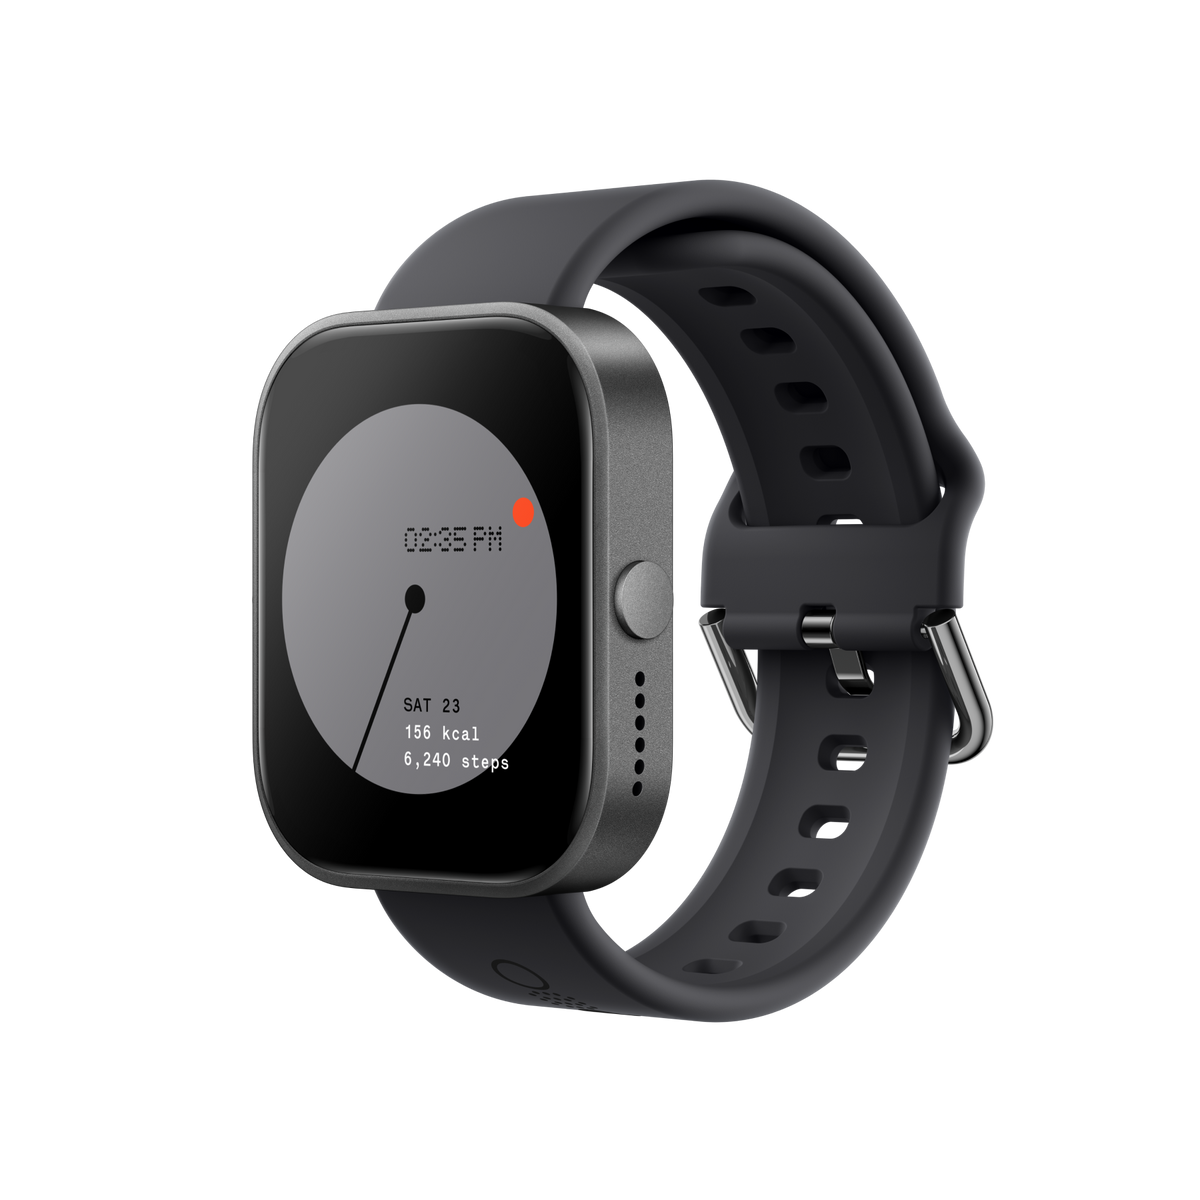 Darkgrey D64A7409 142A 489E 85D4 Nothing &Nbsp; The Nothing Watch Pro Has Cmf With A 1.96″ Amoled Screen, Giving You Instant Access To All The Information On One Screen And Allowing You To Navigate It With Just A Simple Touch. The Touch Is Ultra-Smooth, So You Will Not Find It Difficult To Navigate Around. The Device Has A High-Resolution Display In Which Colors Are Bold, The Characters Are Clear, And It Operates Well Under Various Light Conditions Thus Creating A Good Experience For The User By Its Touch Interface Being Very Responsive. Cmf By Nothing Watch Pro Cmf By Nothing Watch Pro Smartwatch With 1.96 Amoled Display - Dark Grey